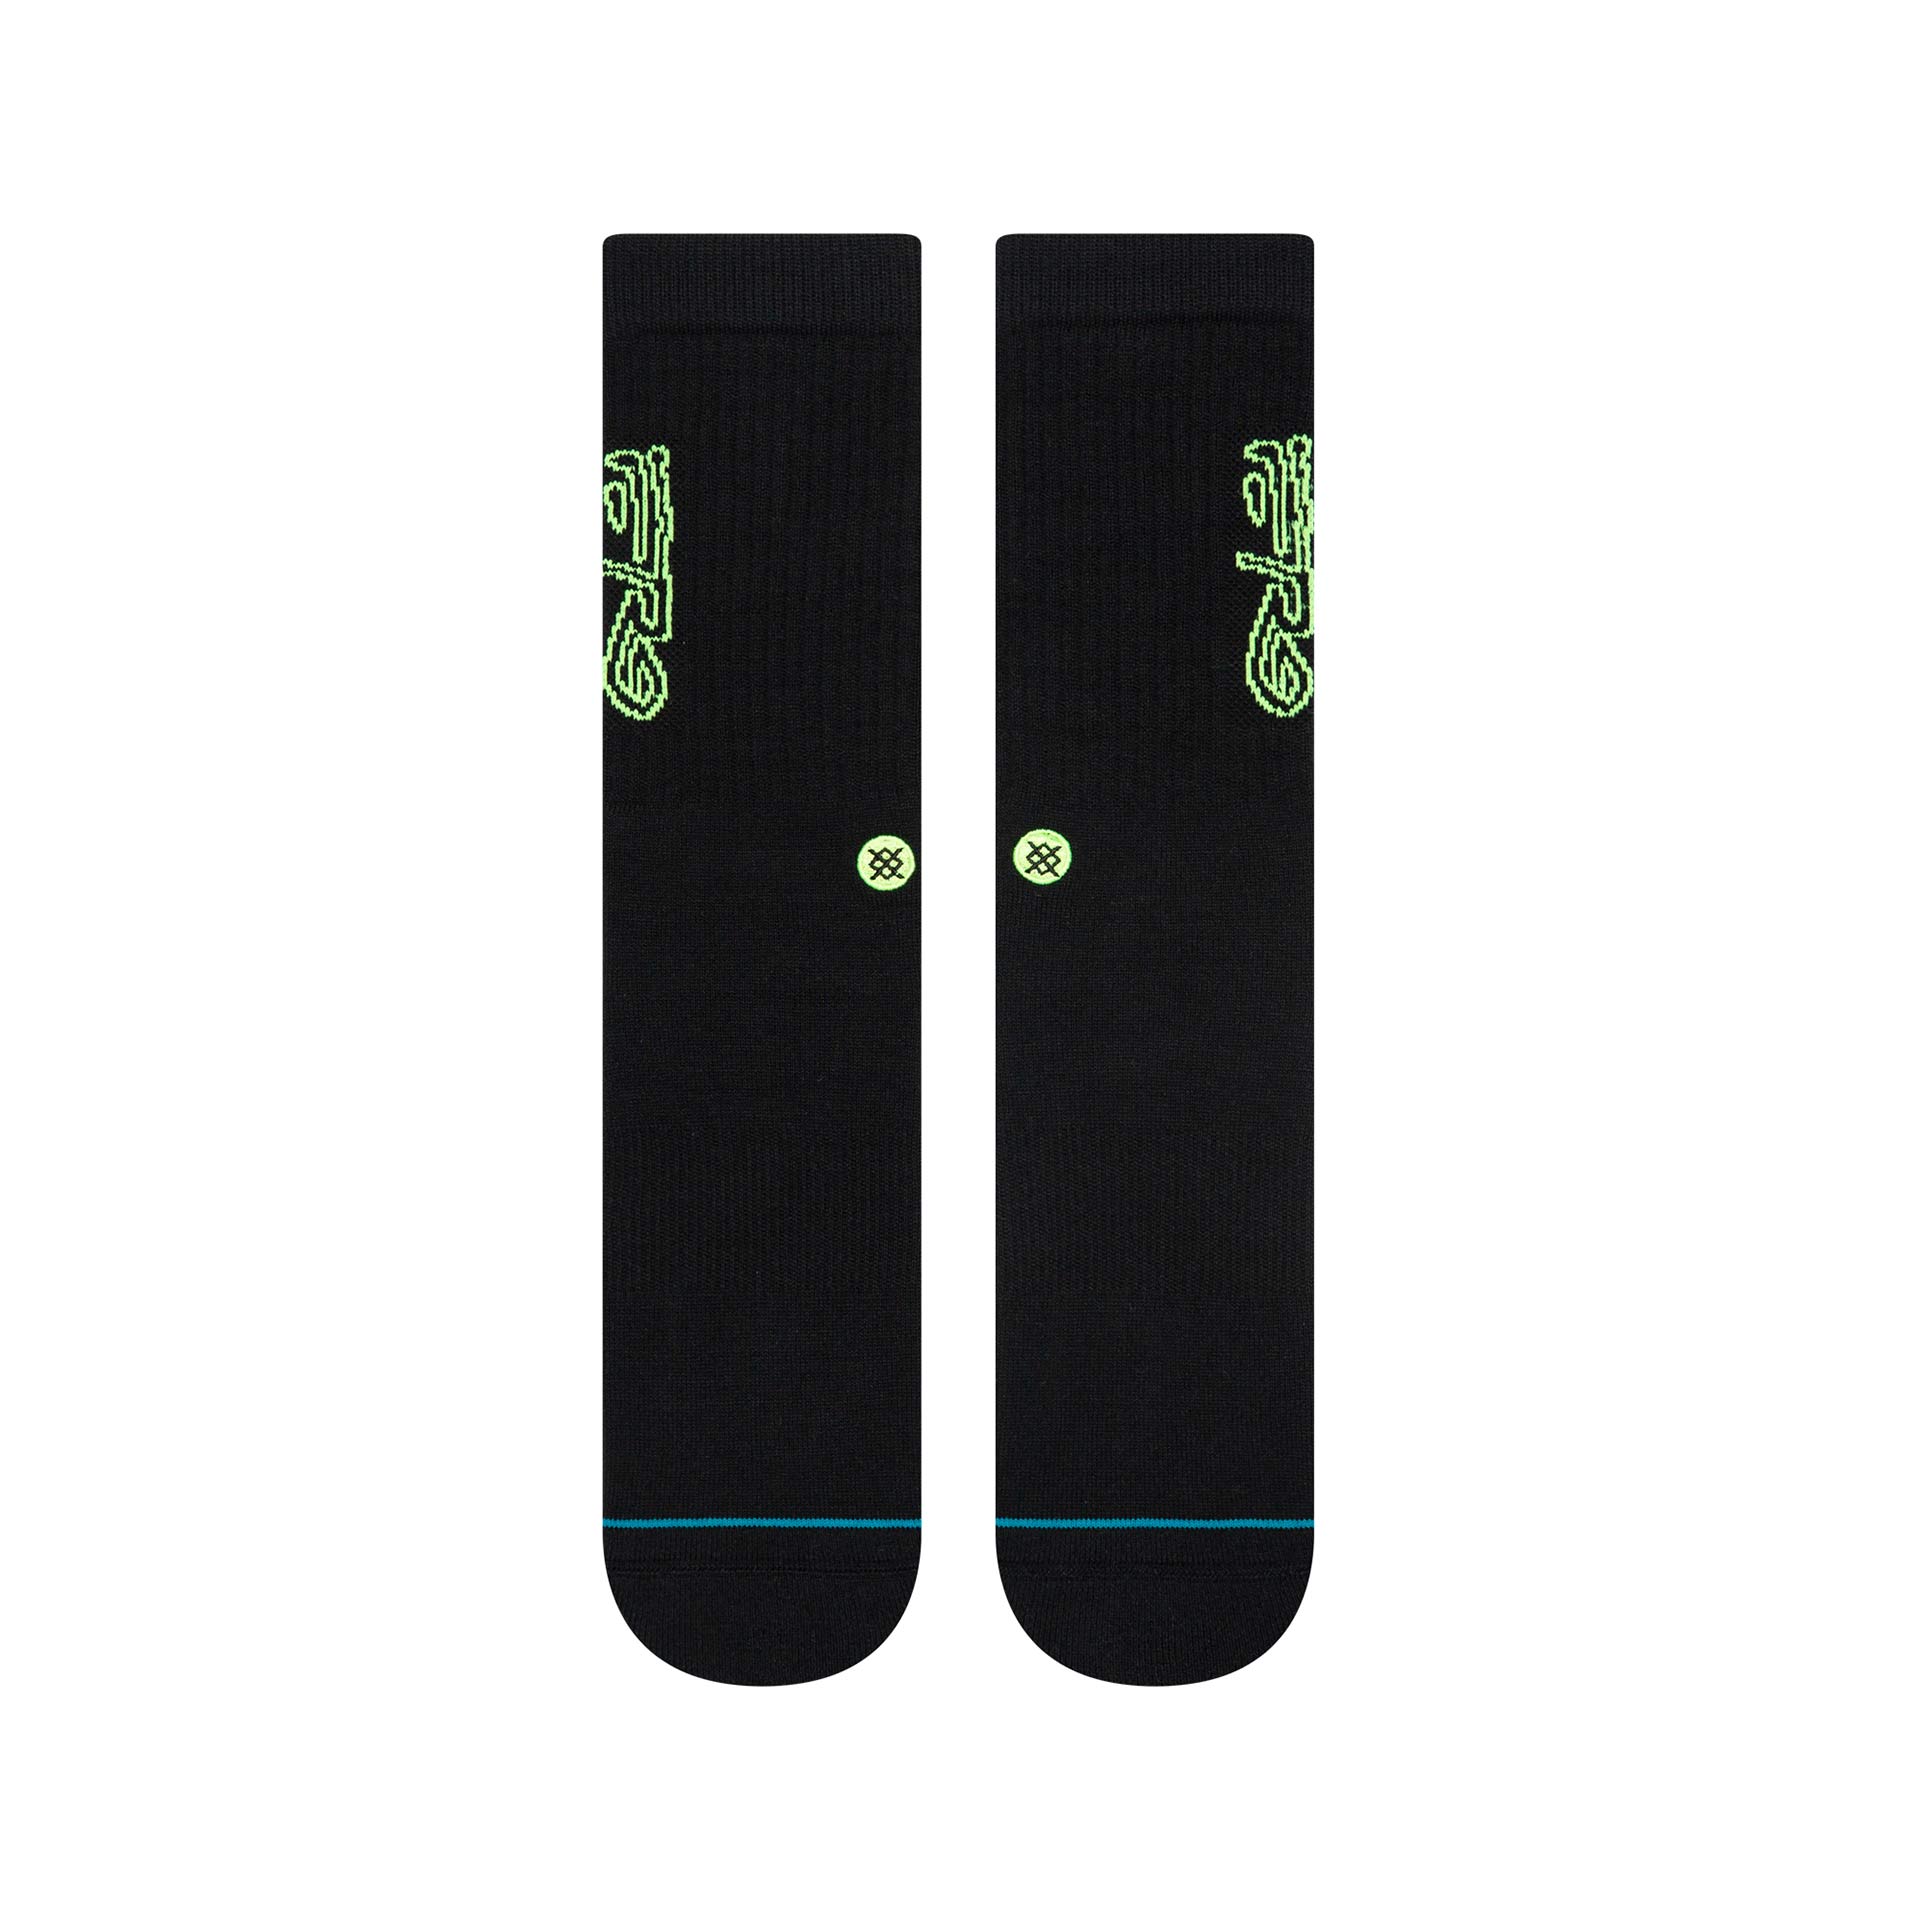 Stance-AAP-FERG-Black-M556A19-Zupport